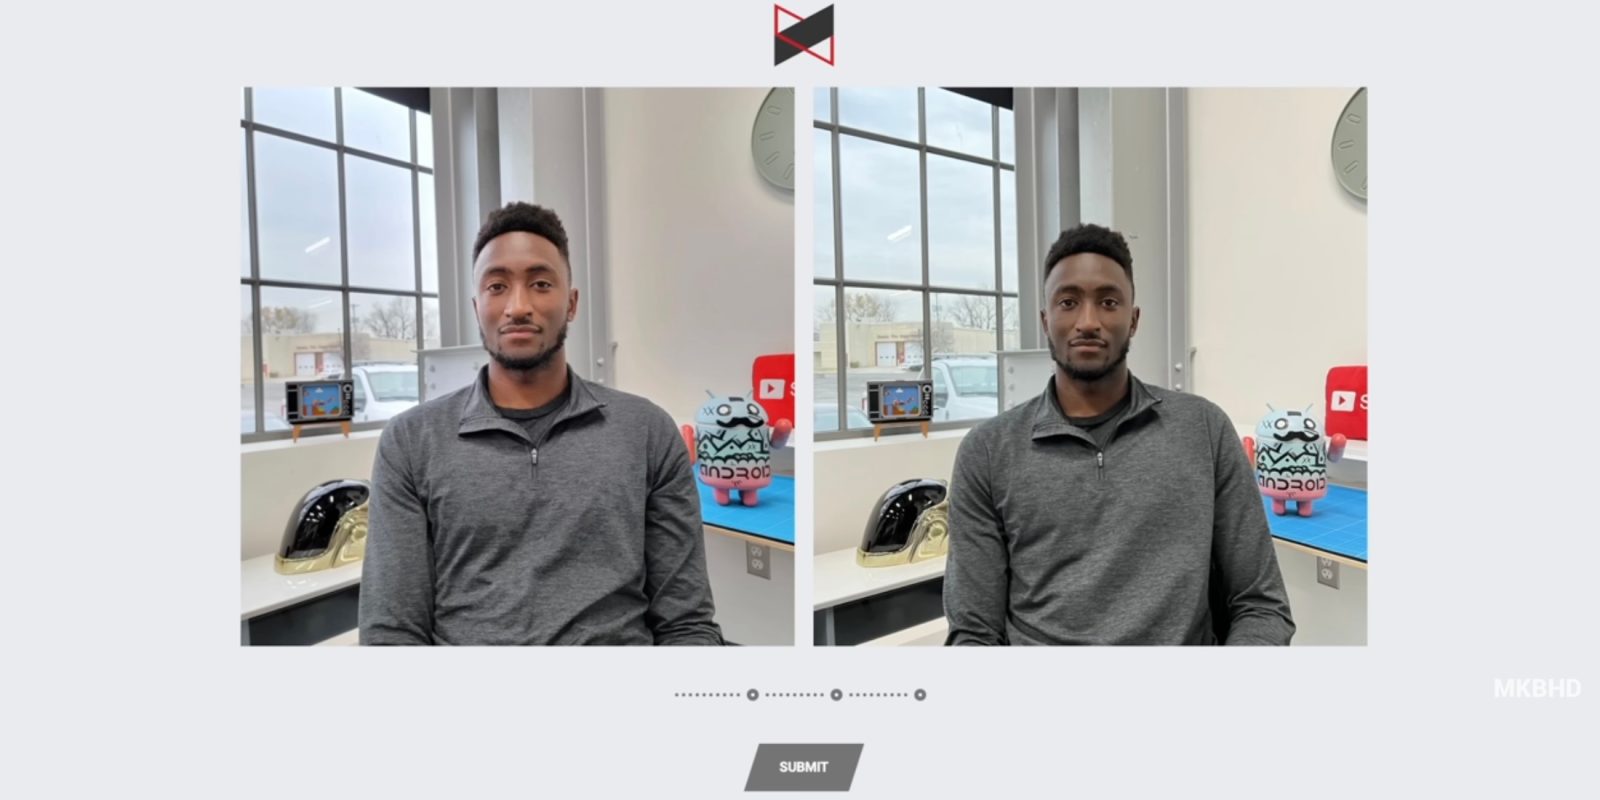 Voting opens for MKBHD's blind smartphone camera test 9to5Mac